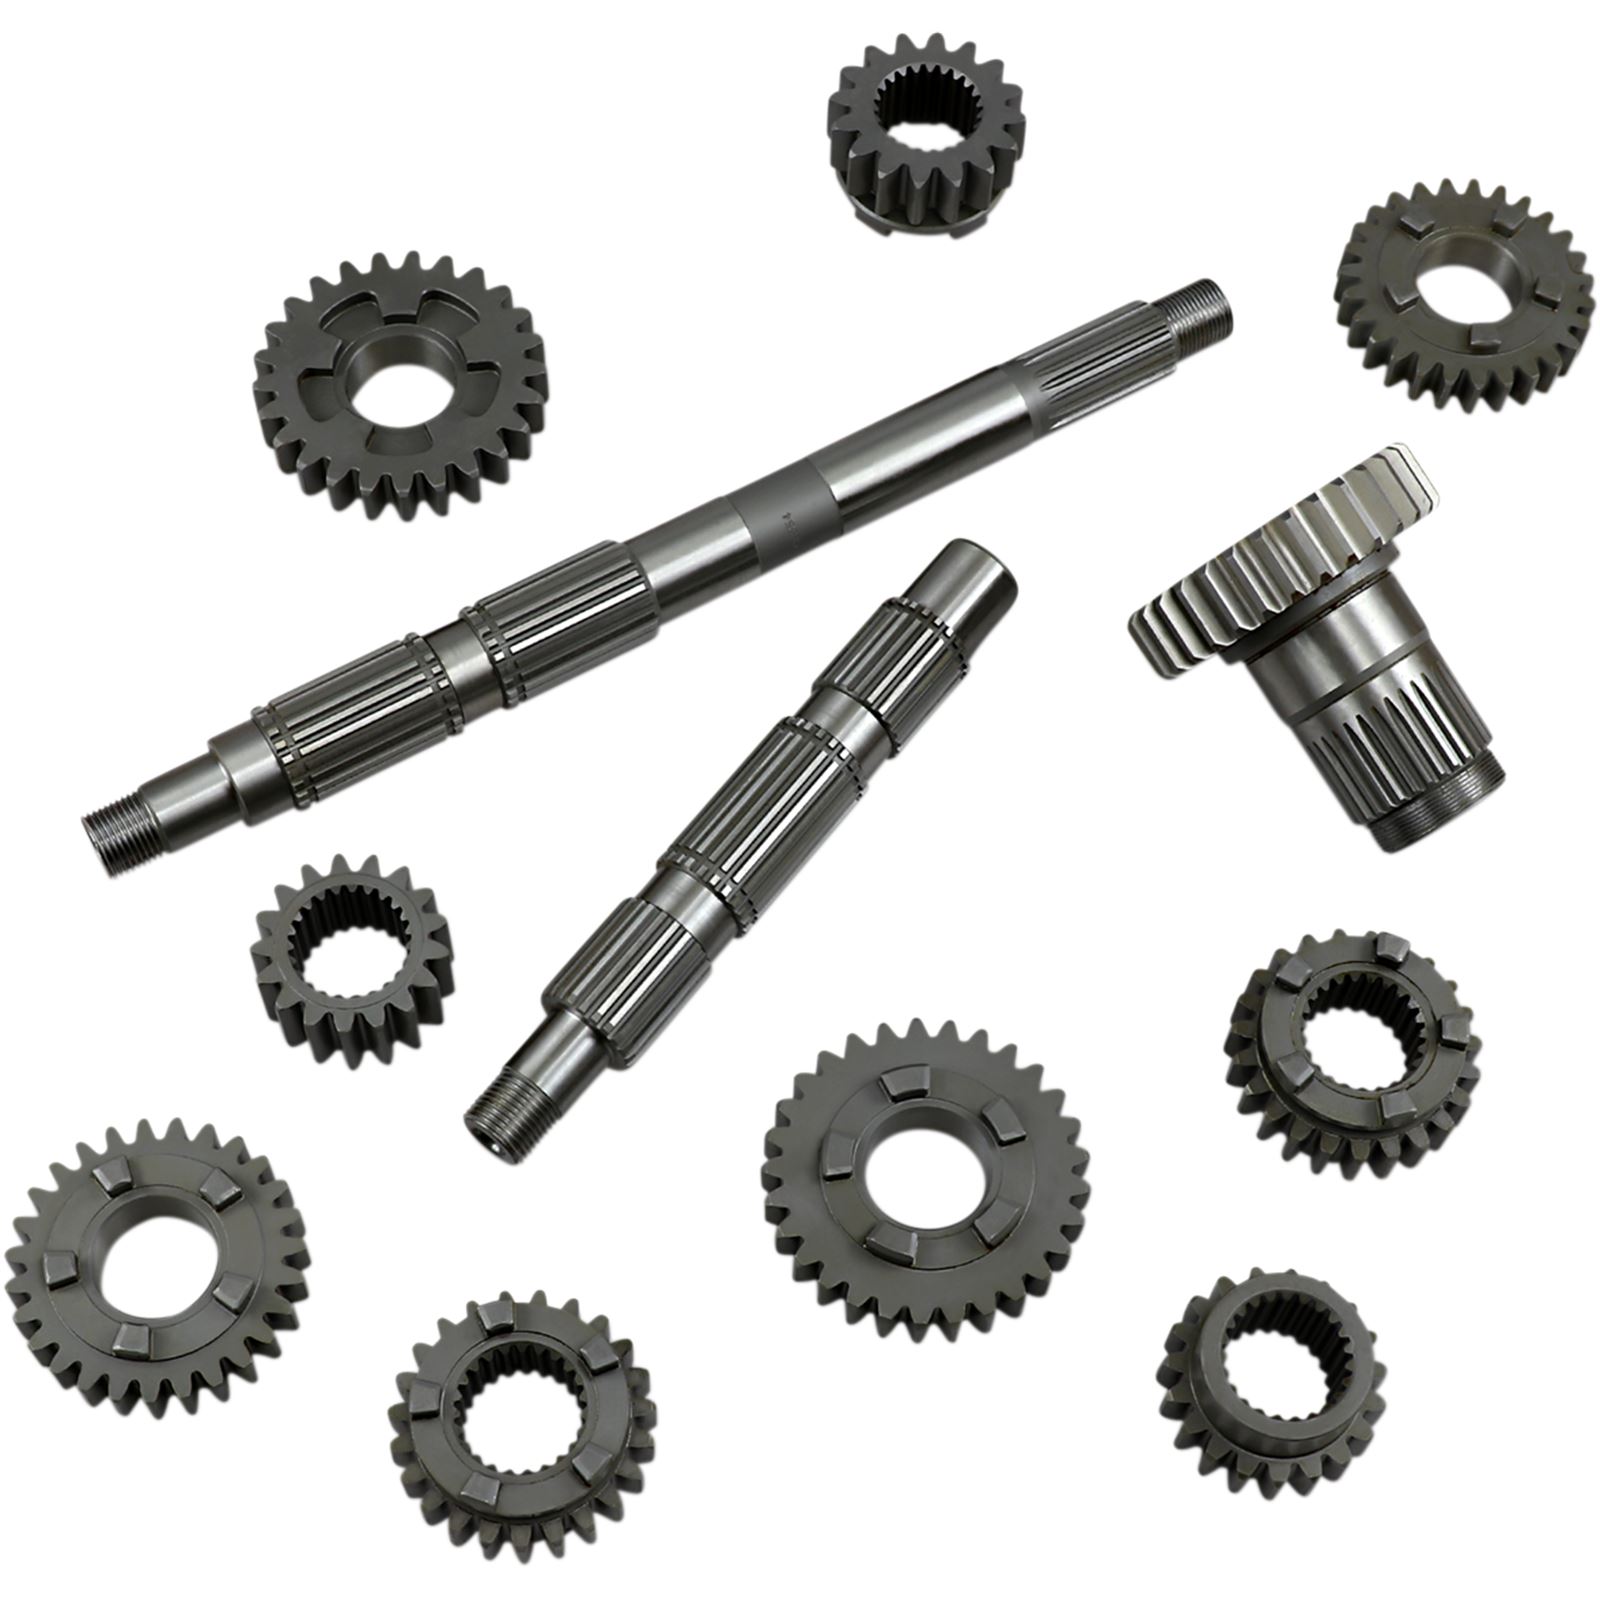 Andrews Products 5-Speed Gear Set - 2.94:1 First Ratio